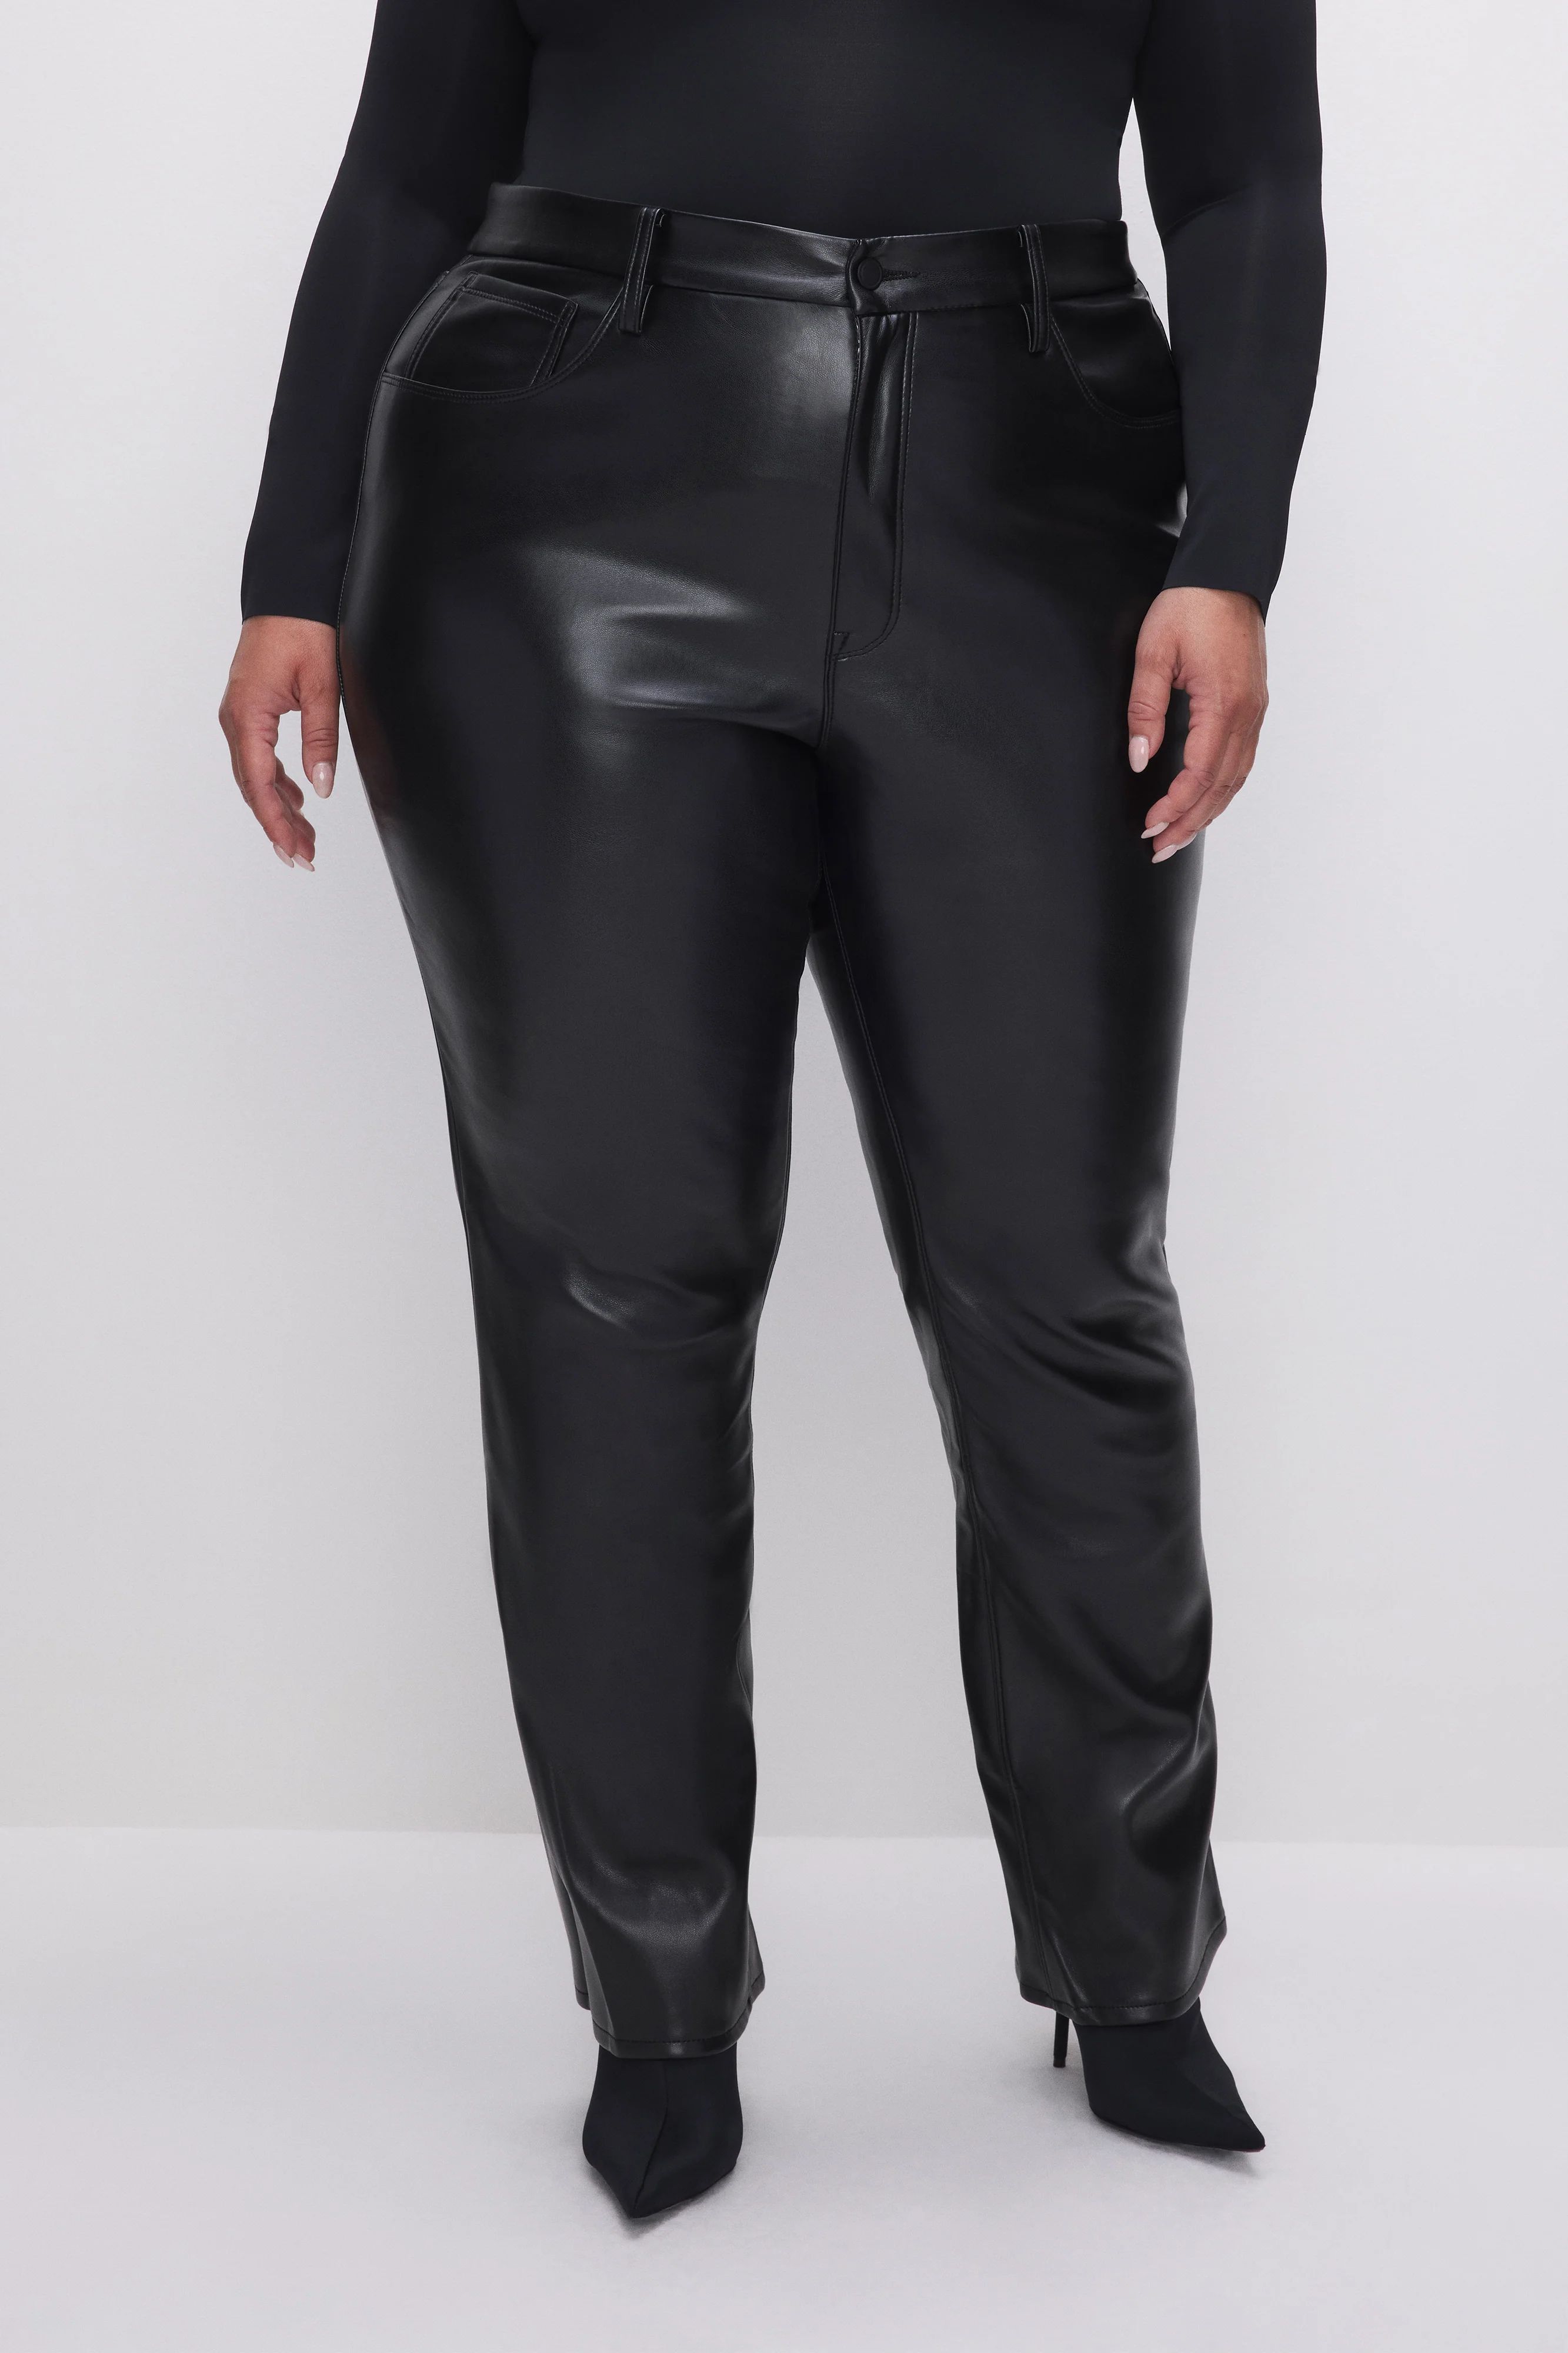 GOOD ICON FAUX LEATHER PANTS | BLACK001 - GOOD AMERICAN | Good American